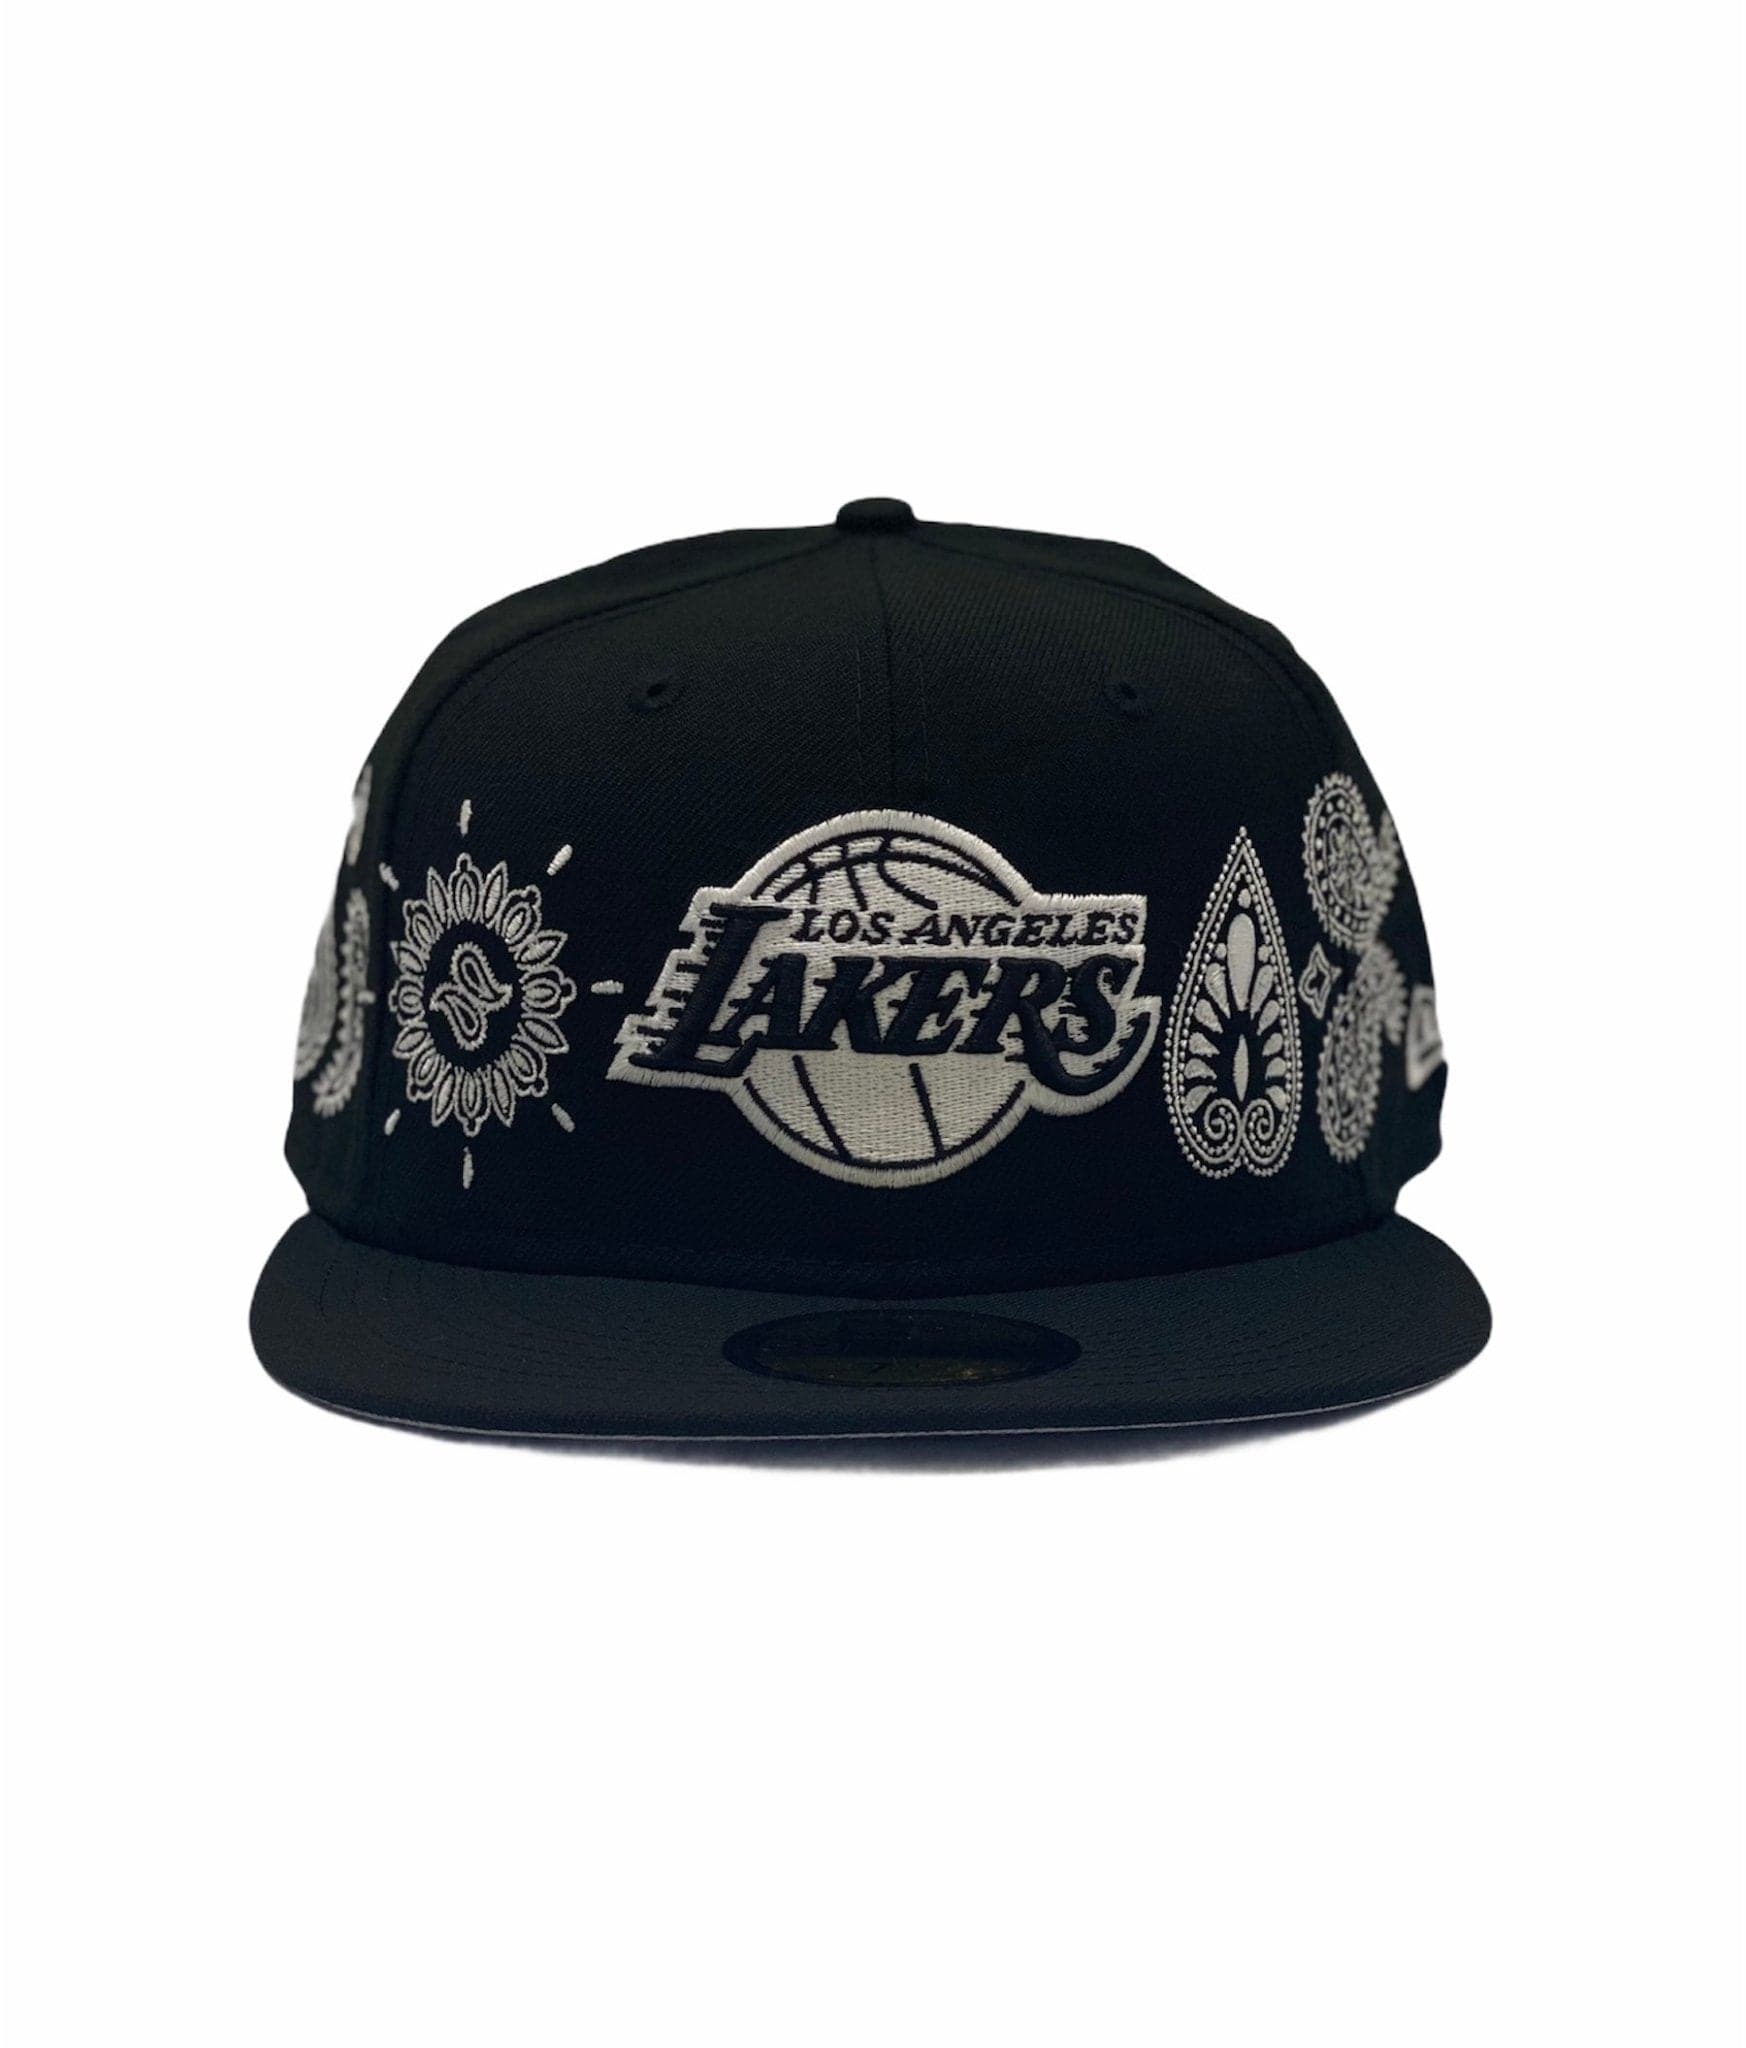 NEW ERA - 59FIFTY LOS ANGELES LAKERS / PAISLEY ELEMENTS / FITTED CAP (BLACK) - The Magnolia Park